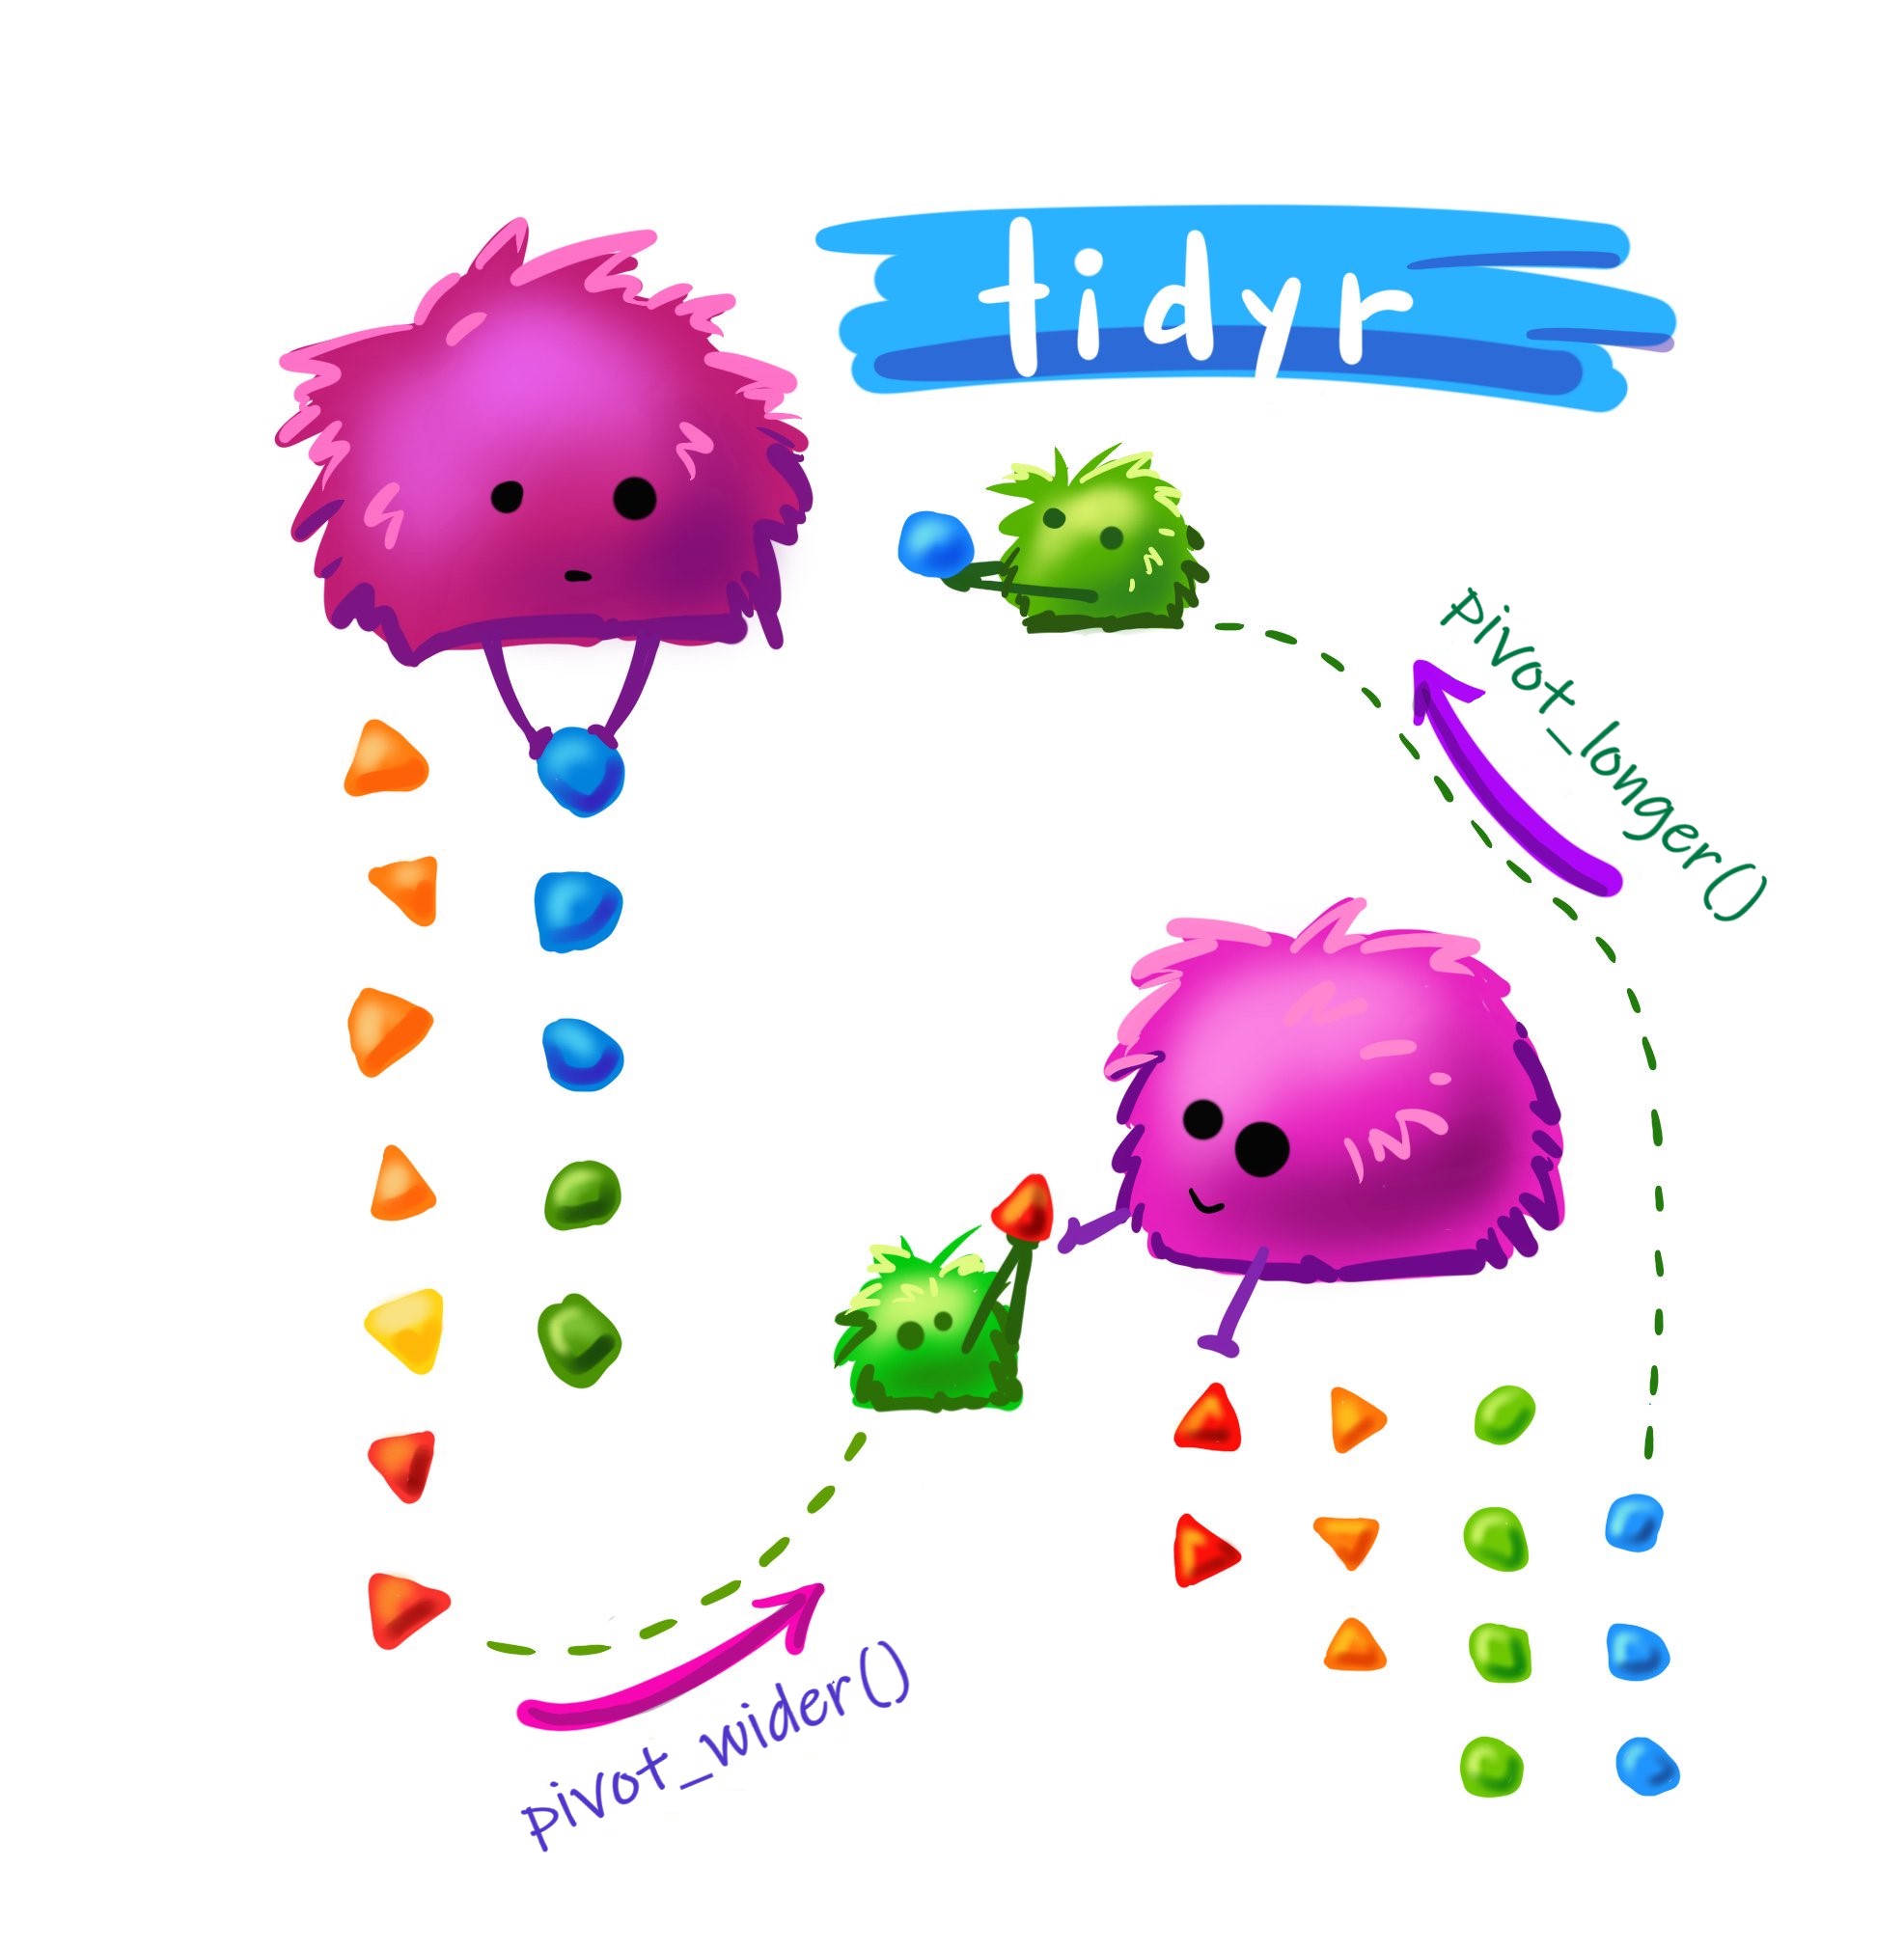 Cute monsters moving colored shapes arranged in two long columns and then 4 short columns.